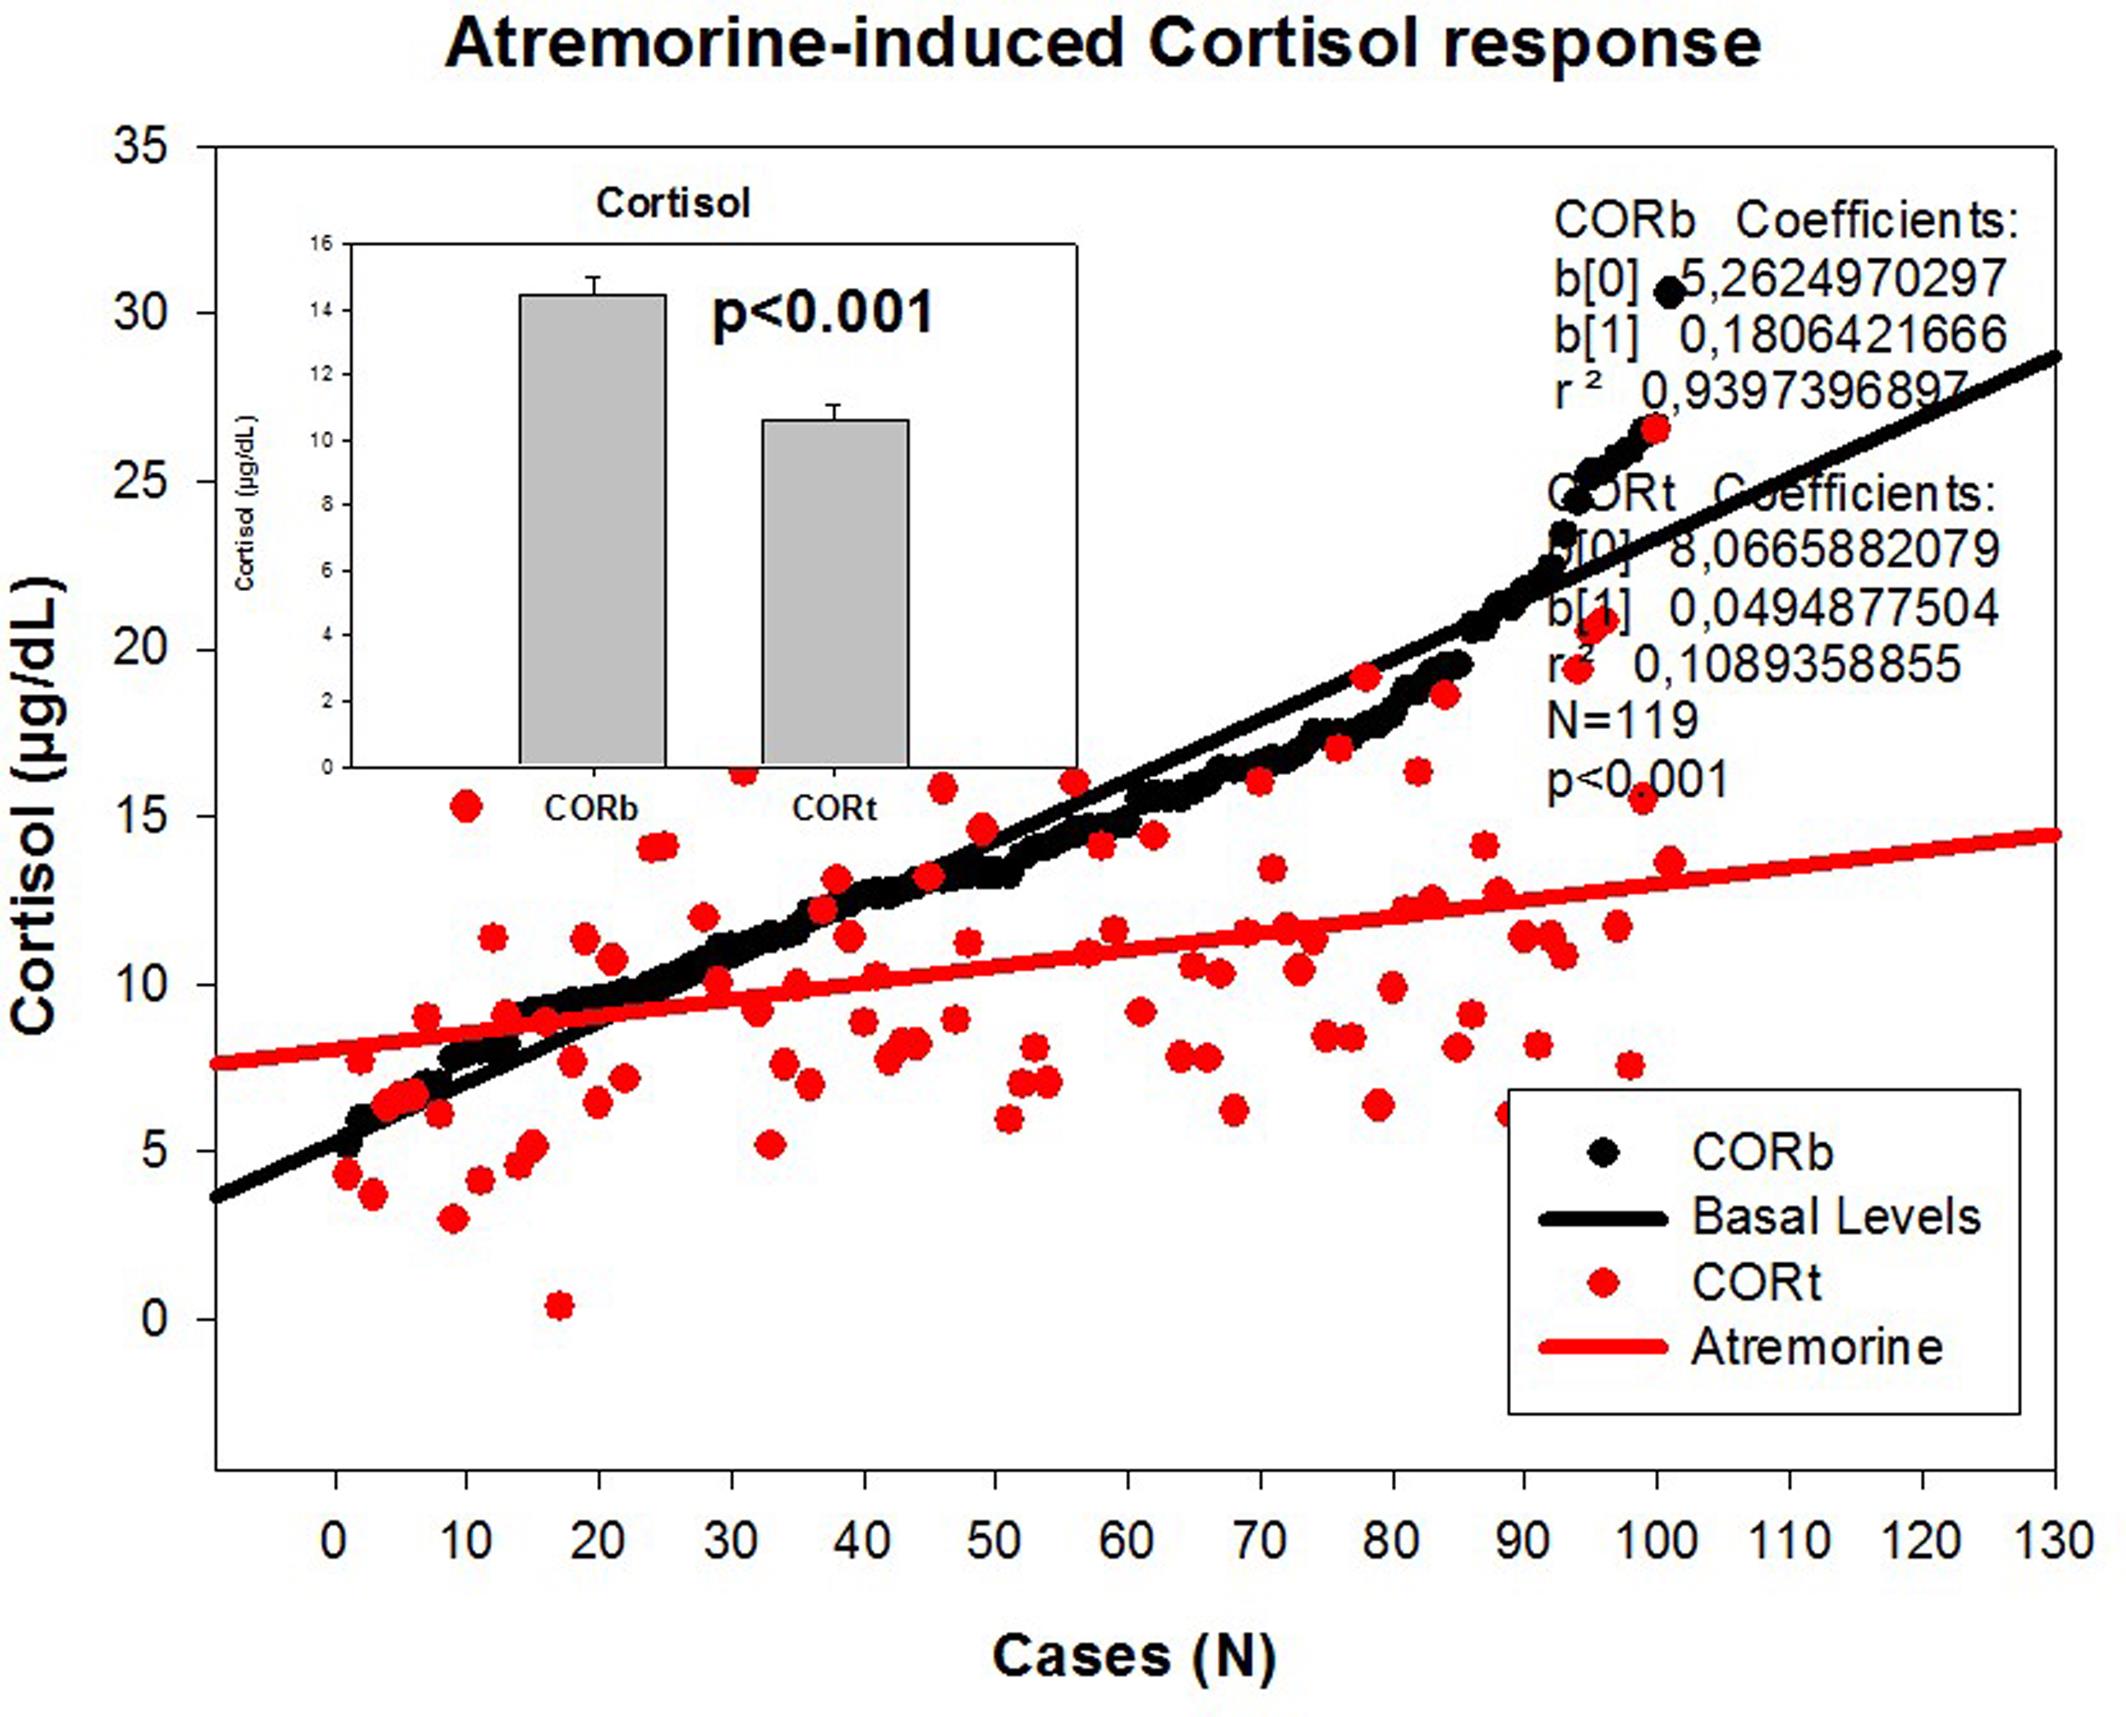 Atremorine-induced cortisol (COR) response in patients with Parkinsonian disorders.